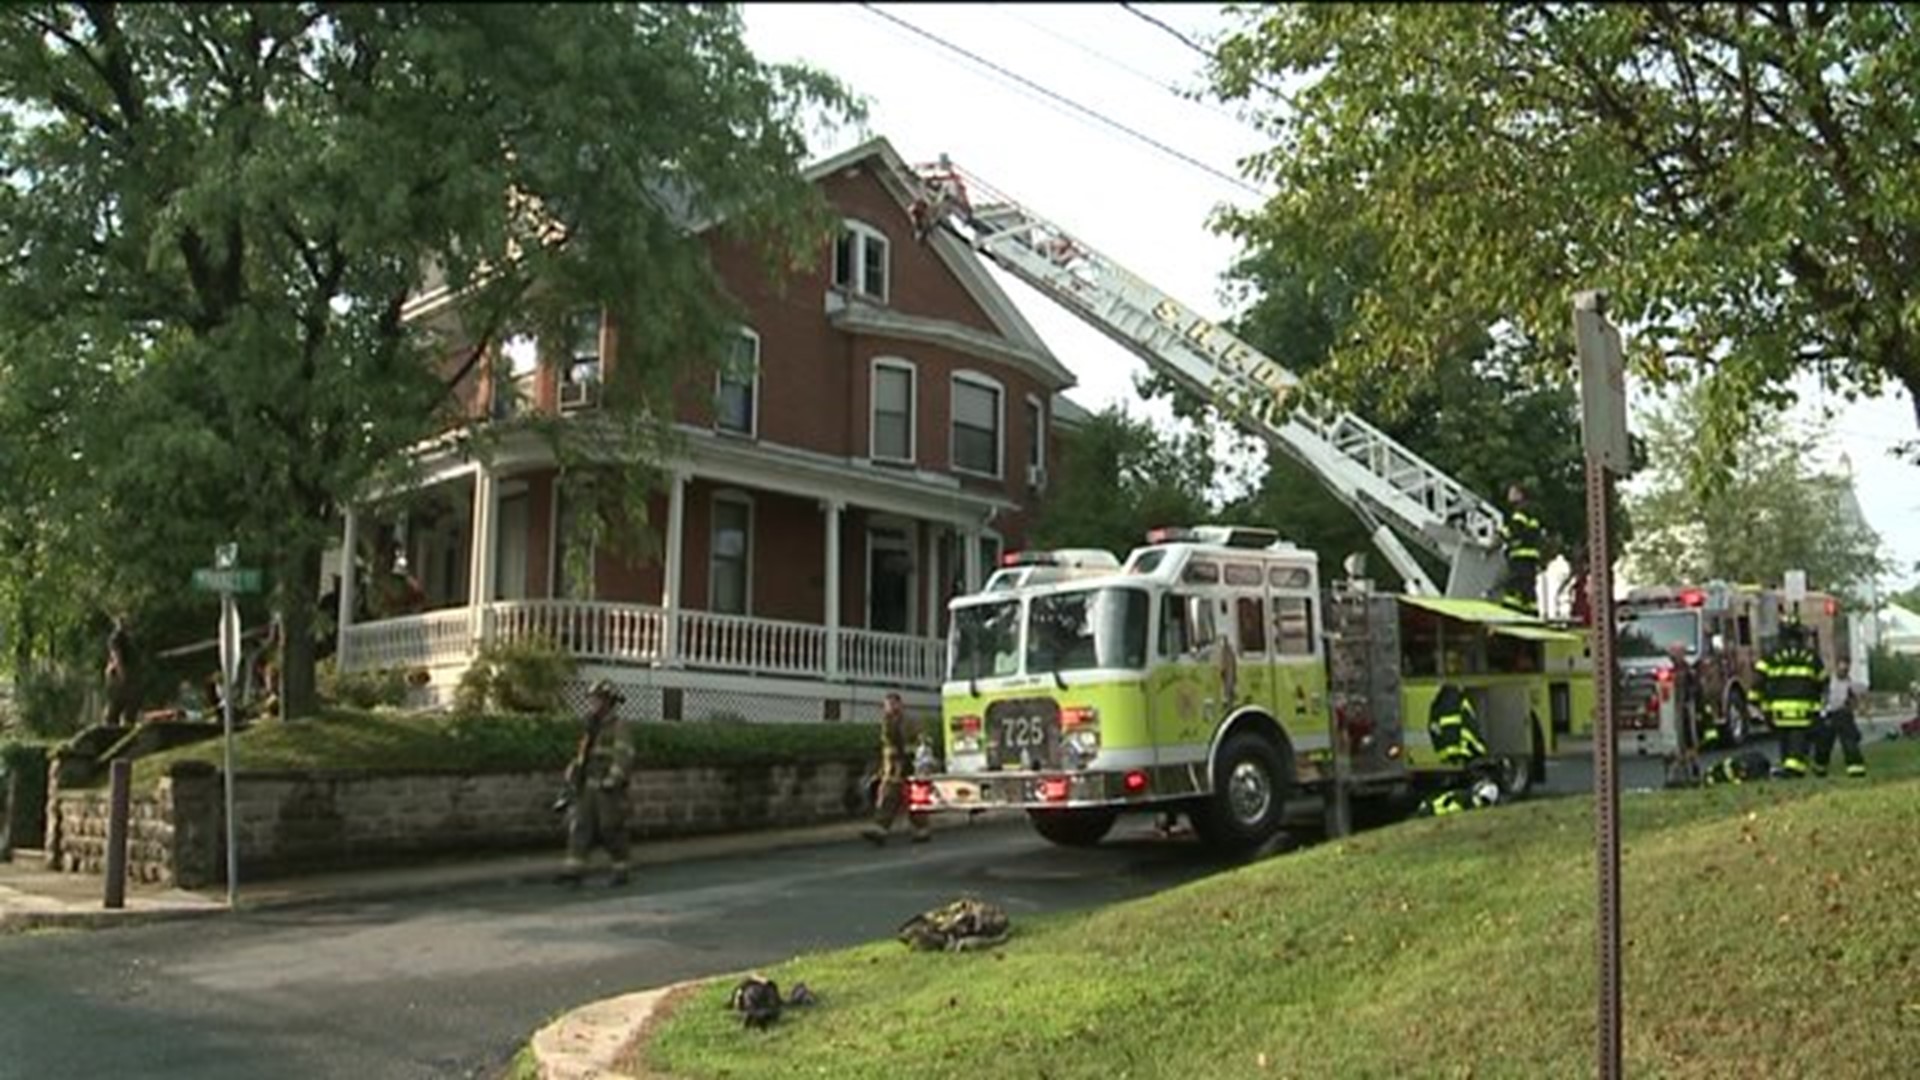 Family Tries to Recover After Lightning Strike and Fire At Home